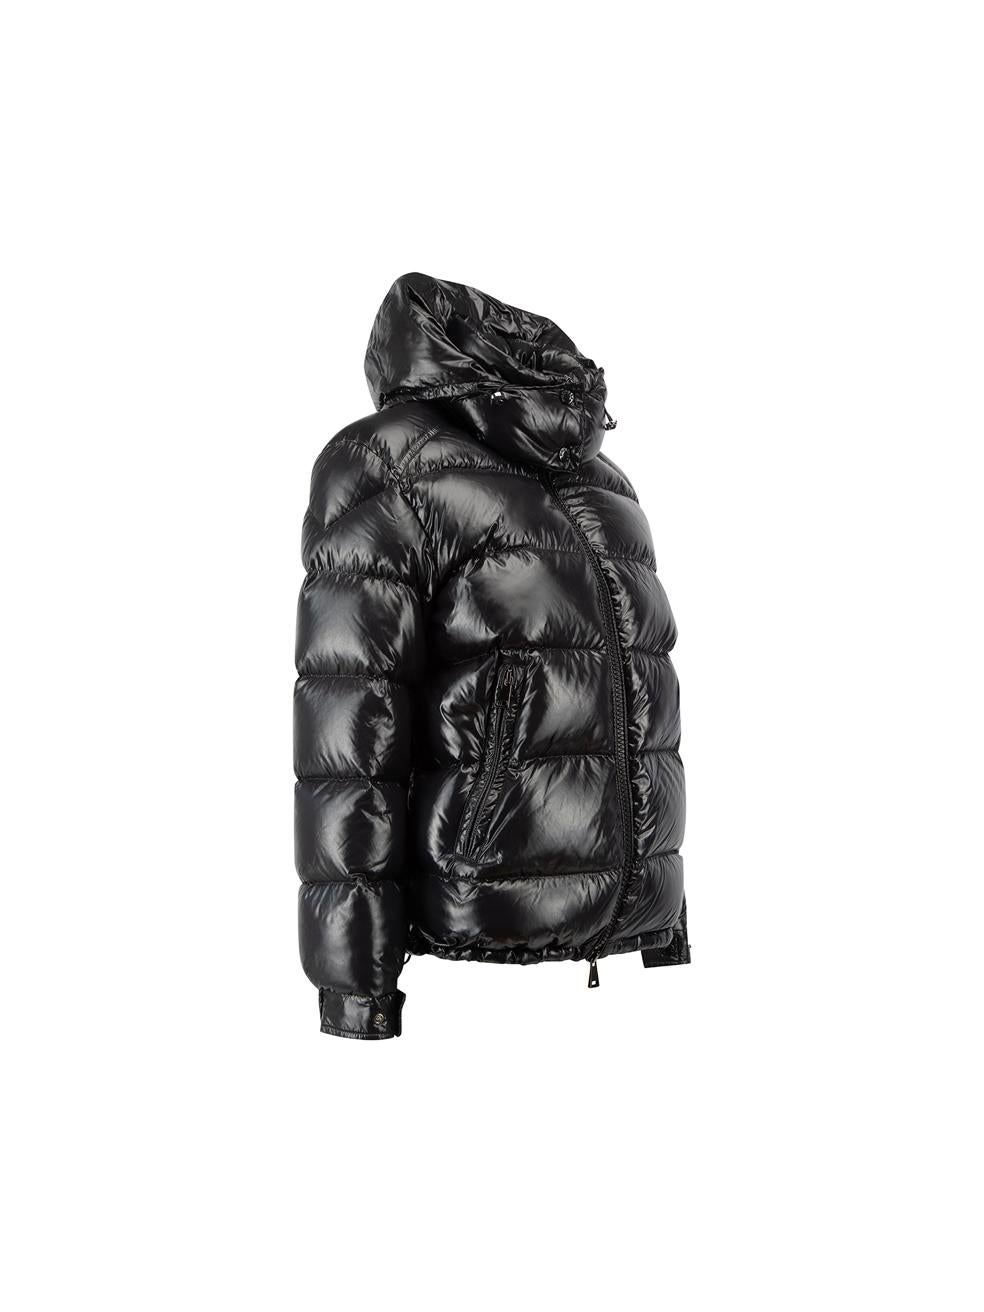 CONDITION is Very good. Hardly any visible wear to coat is evident on this used Moncler designer resale item



Details


Black

Synthetic

Quilted puffer jacket

Front double zip closure

Snap buttoned cuffs

Snap buttons detachable hood with